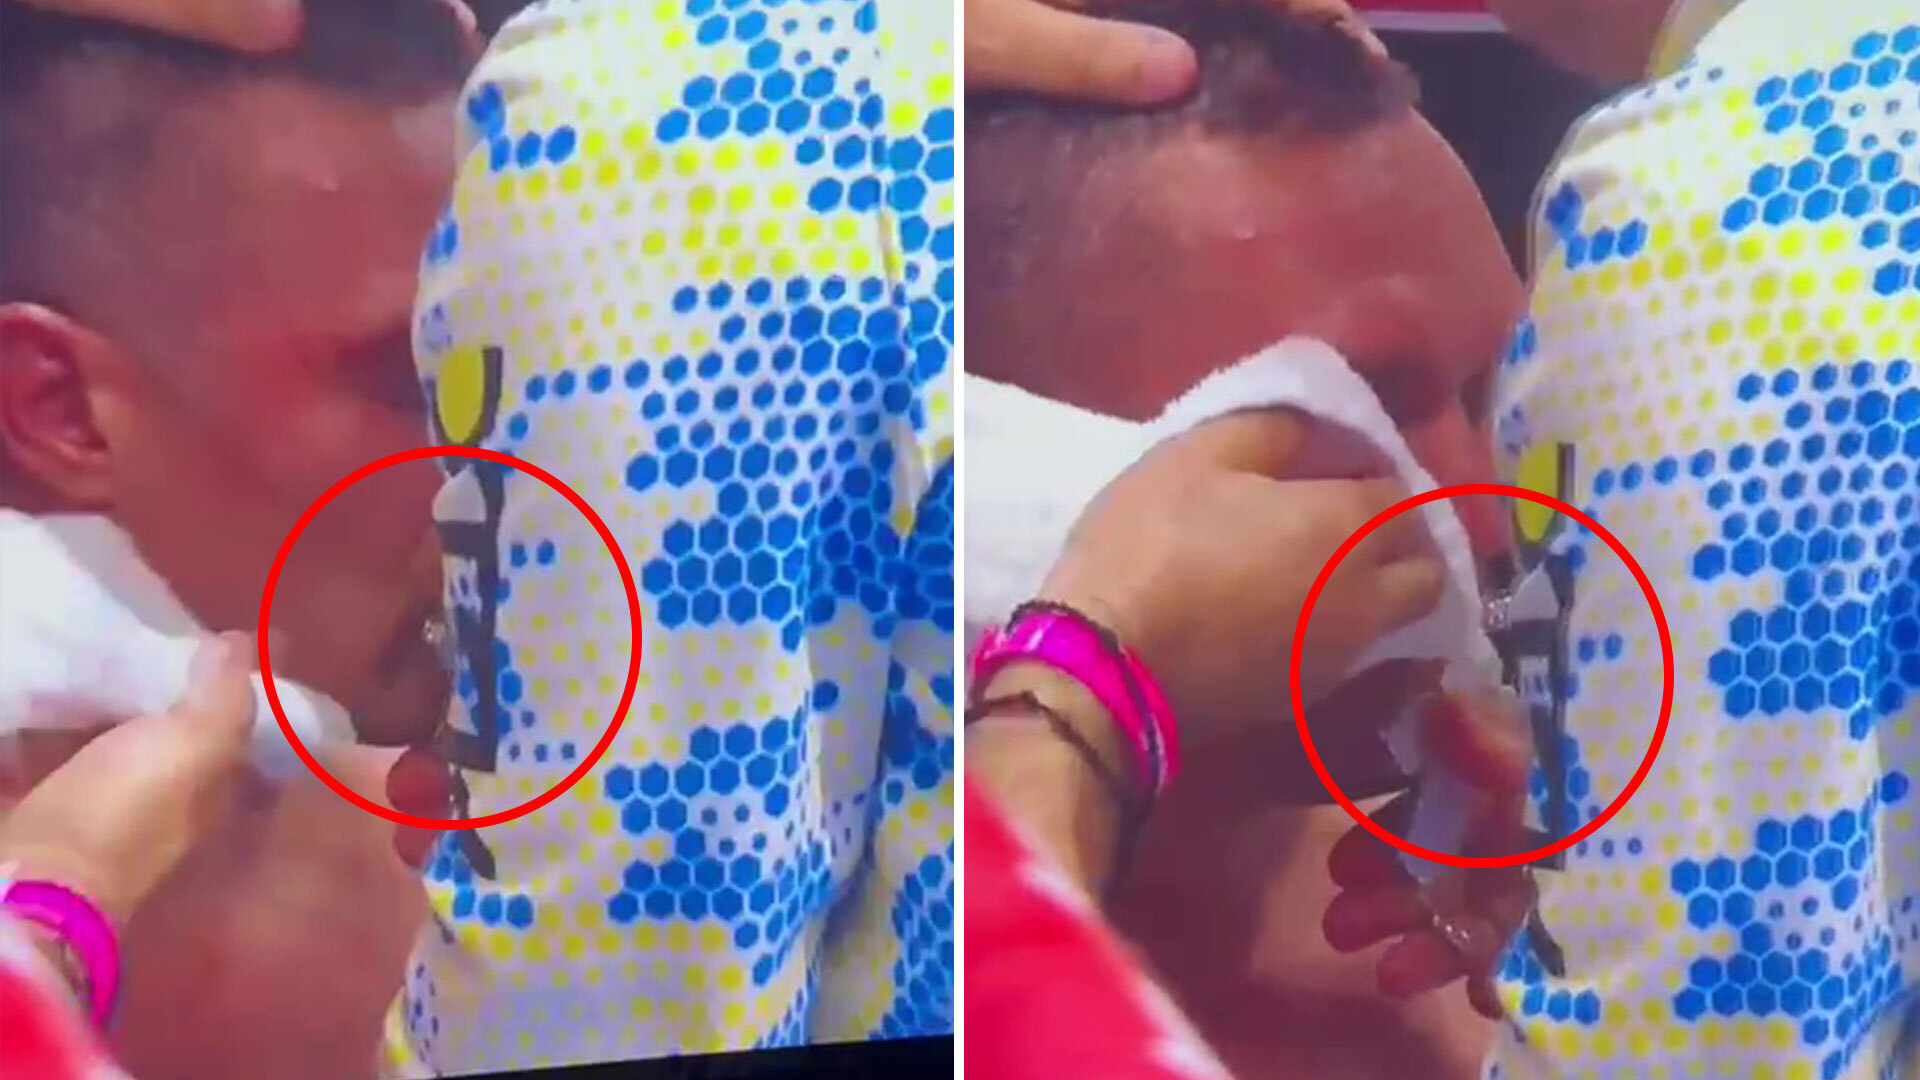 Fans cook up wild conspiracy theory after spotting Oleksandr Usyk ‘using inhaler’ between rounds during Tyson Fury win [Video]